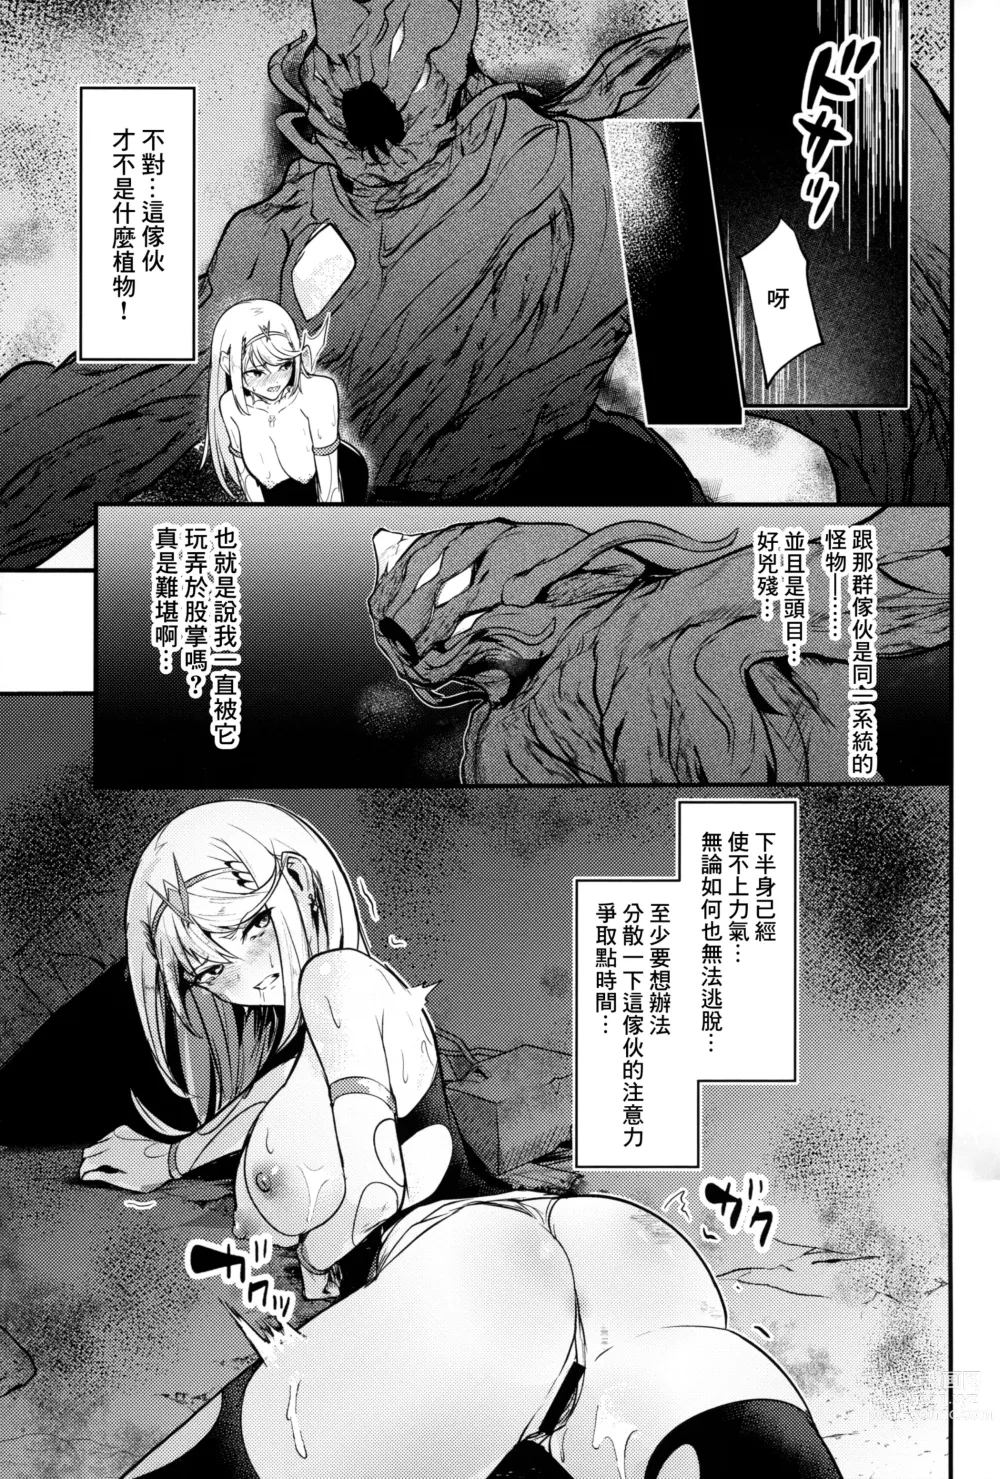 Page 10 of doujinshi Falling into The End